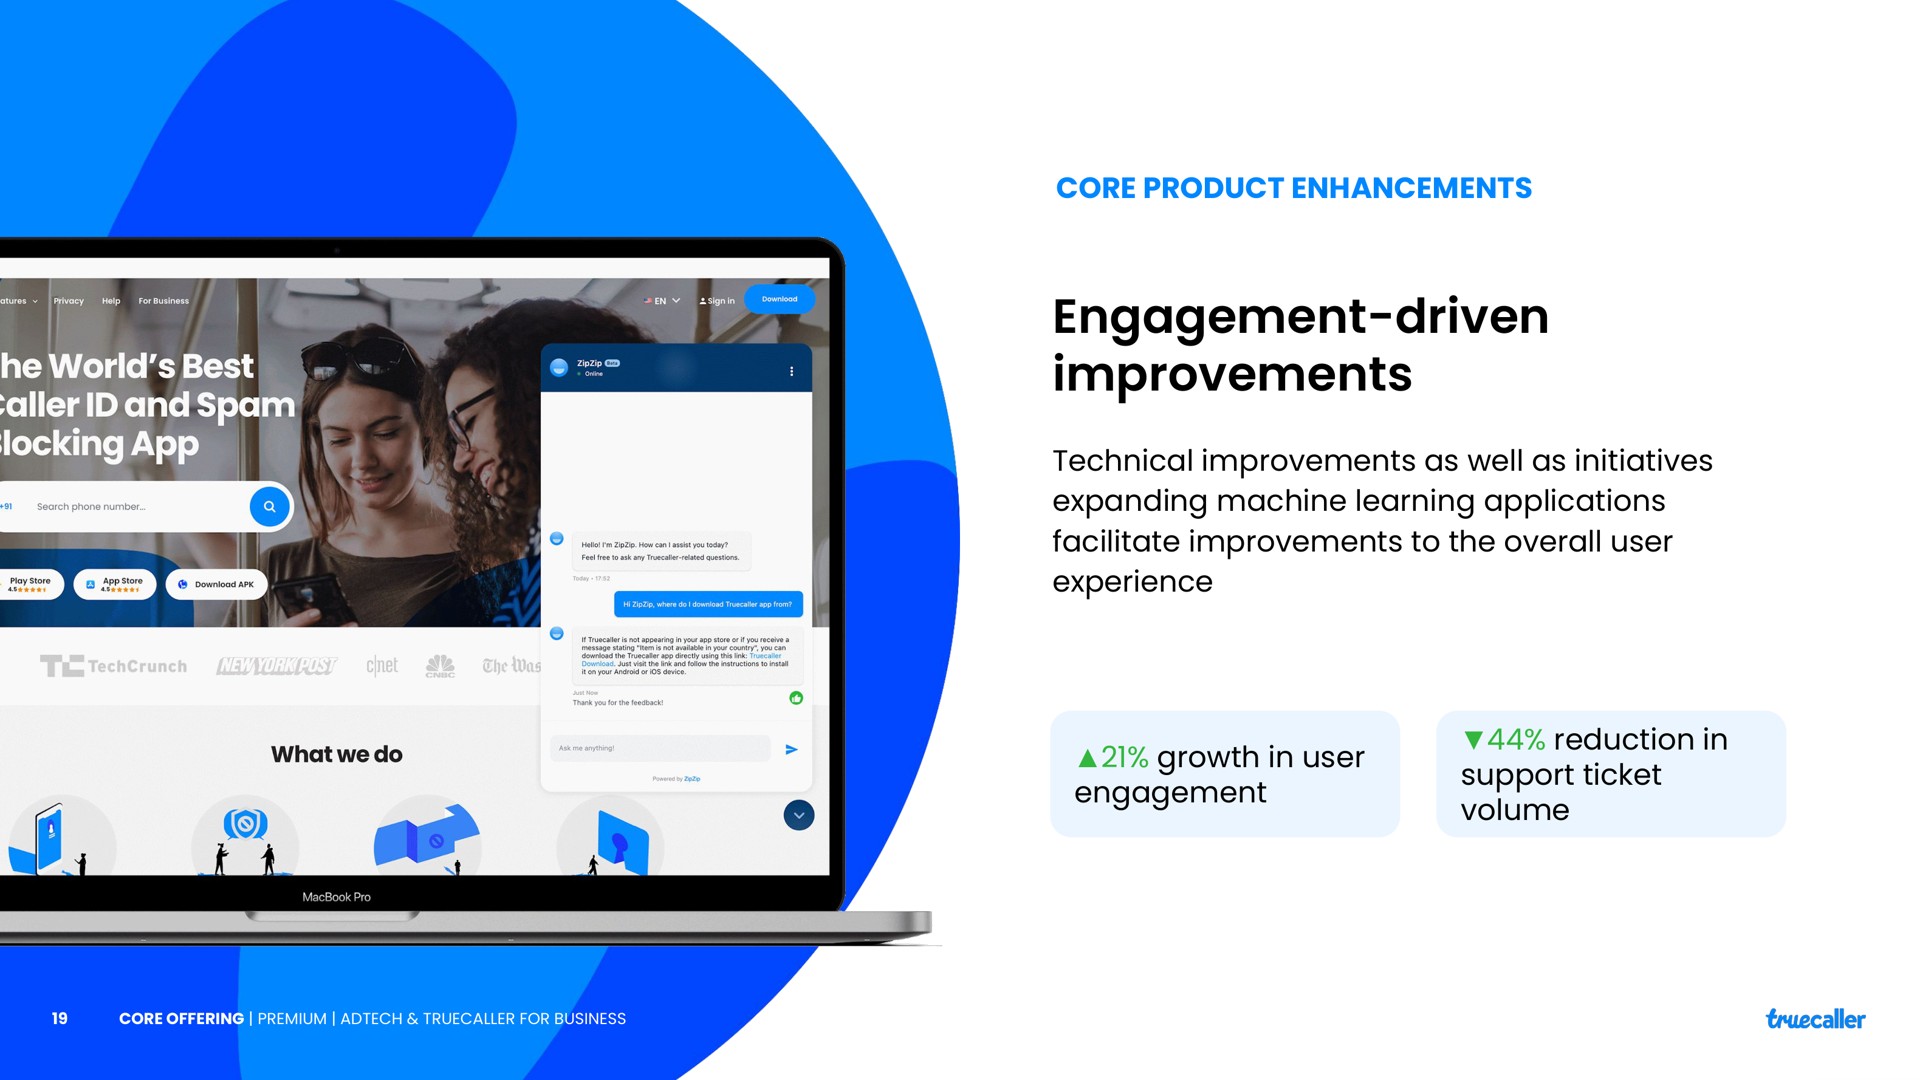 core product enhancements engagement driven improvements technical improvements as well as initiatives expanding machine learning applications facilitate improvements to the overall user experience growth in user engagement reduction in support ticket volume | Truecaller